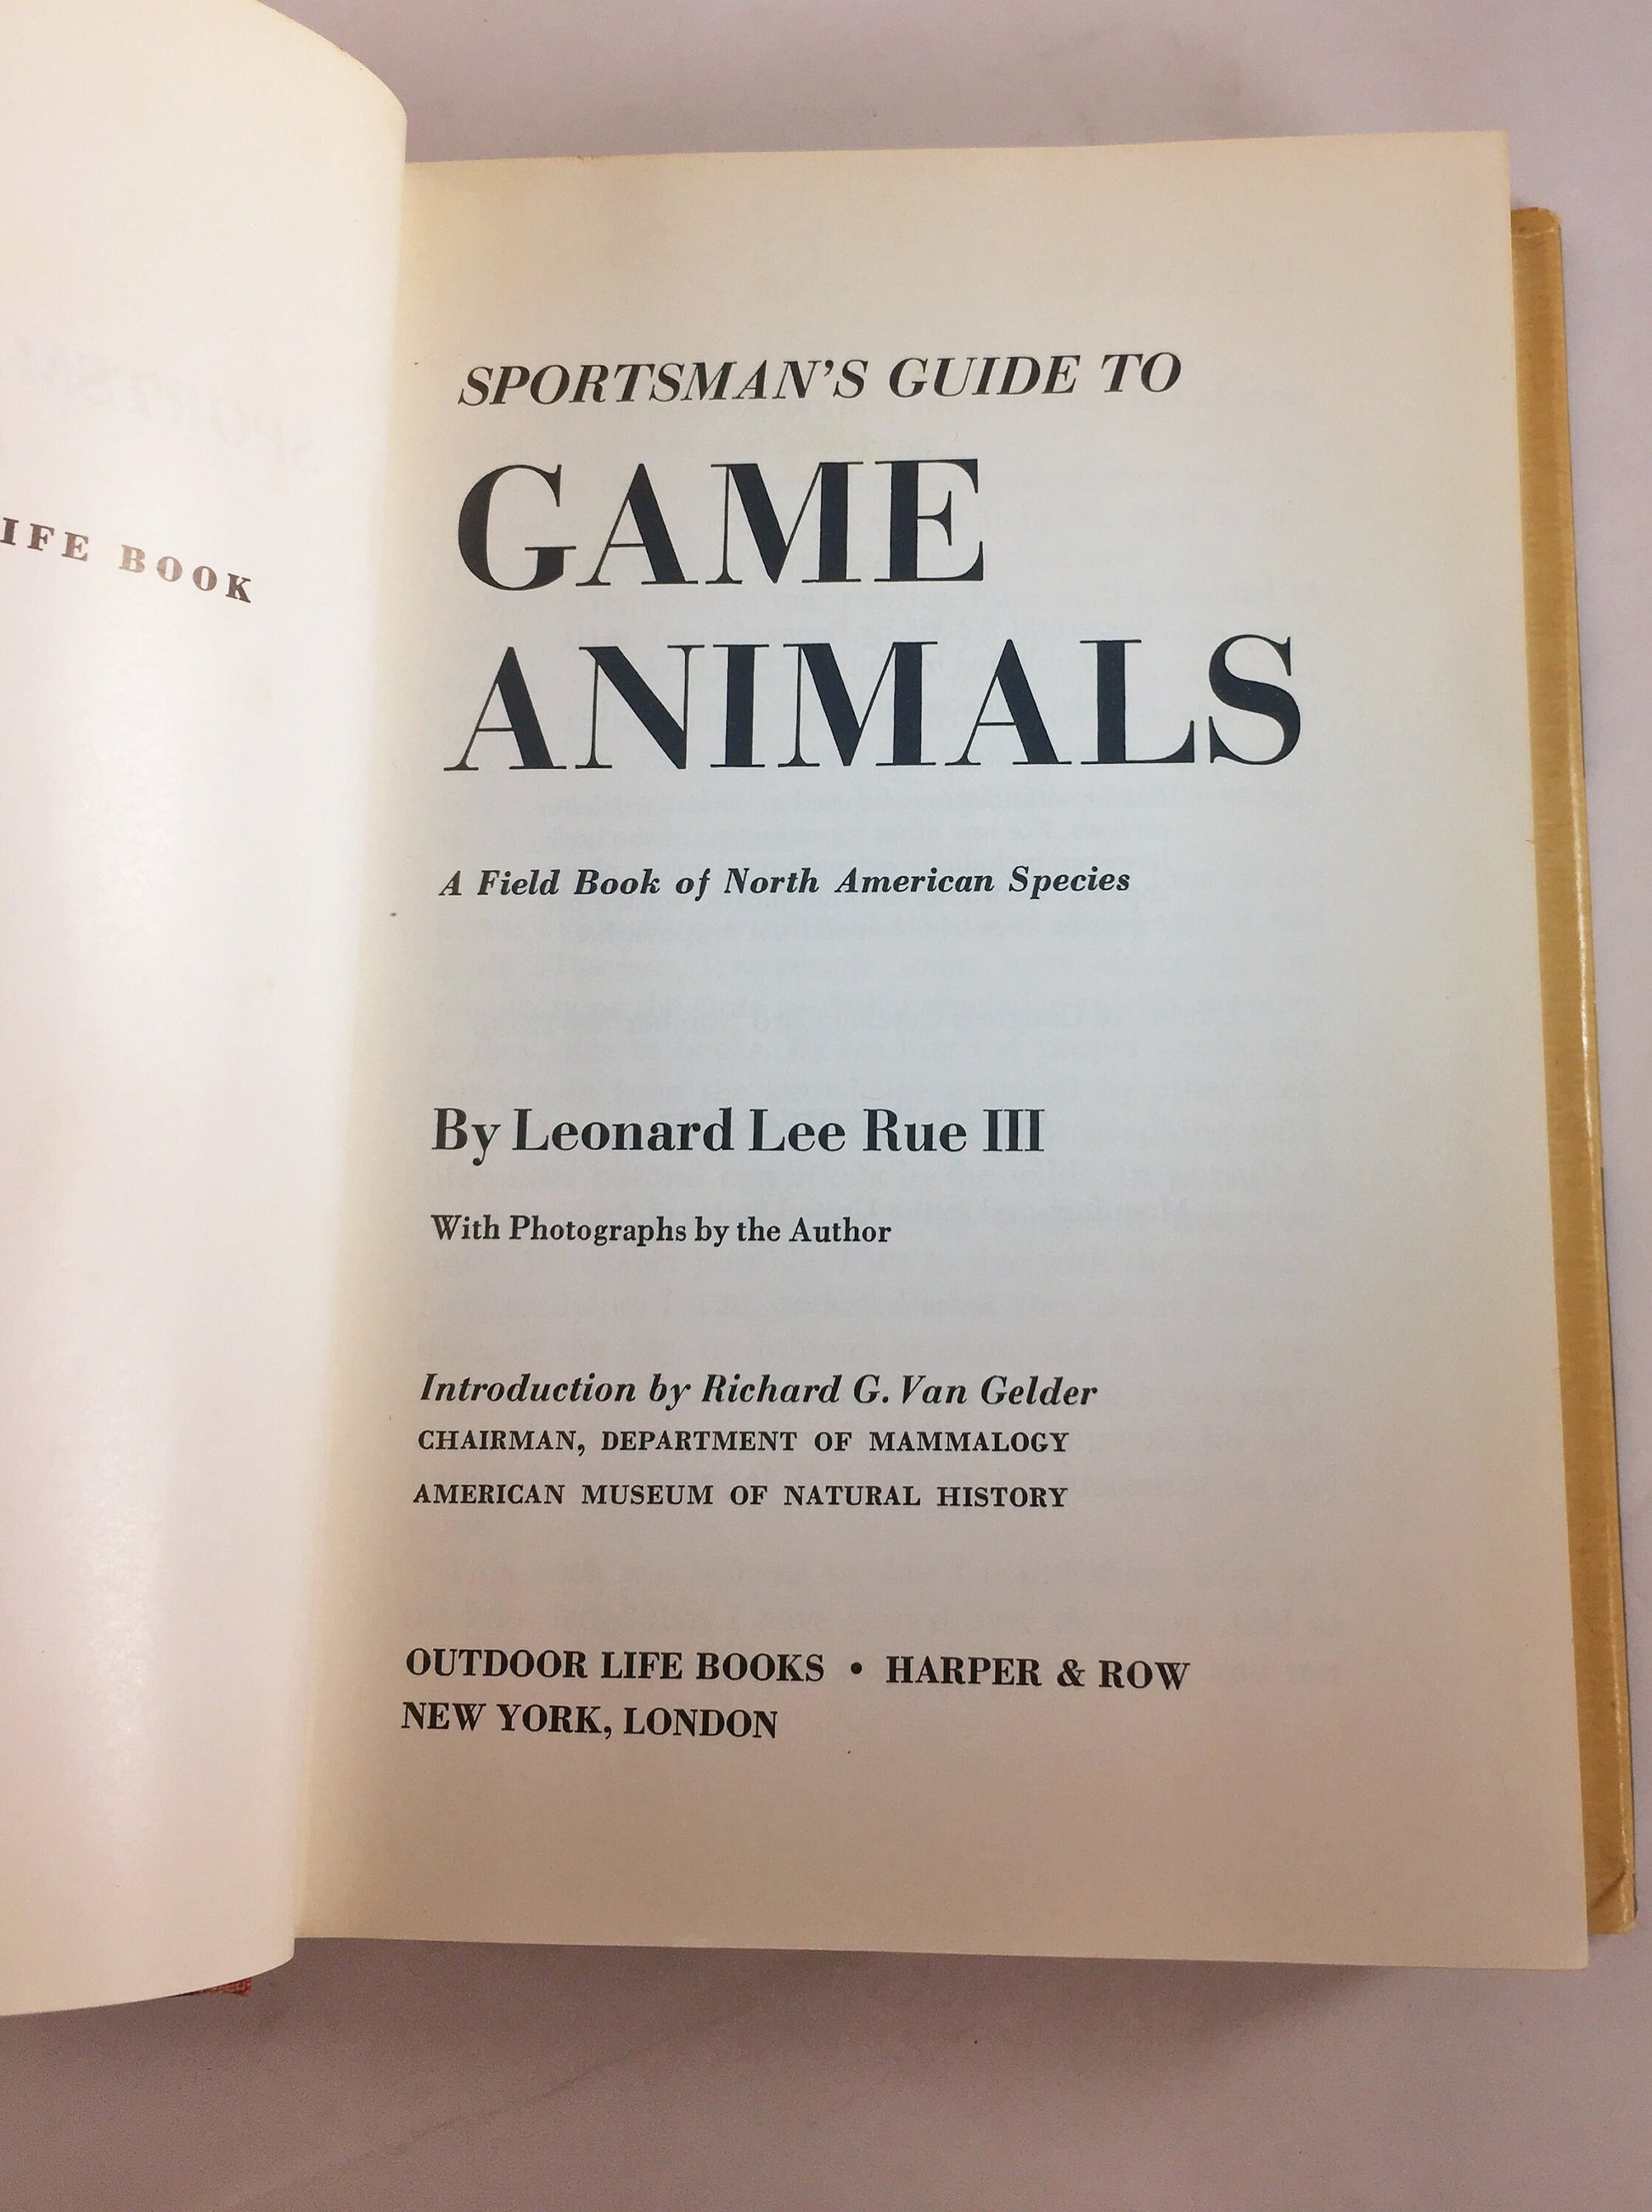 Game Animals Sportsman's Guide. Vintage cabin decor book by Leonard Lee Rue circa 1968. Wildlife and Nature glamping camping Gorpcore